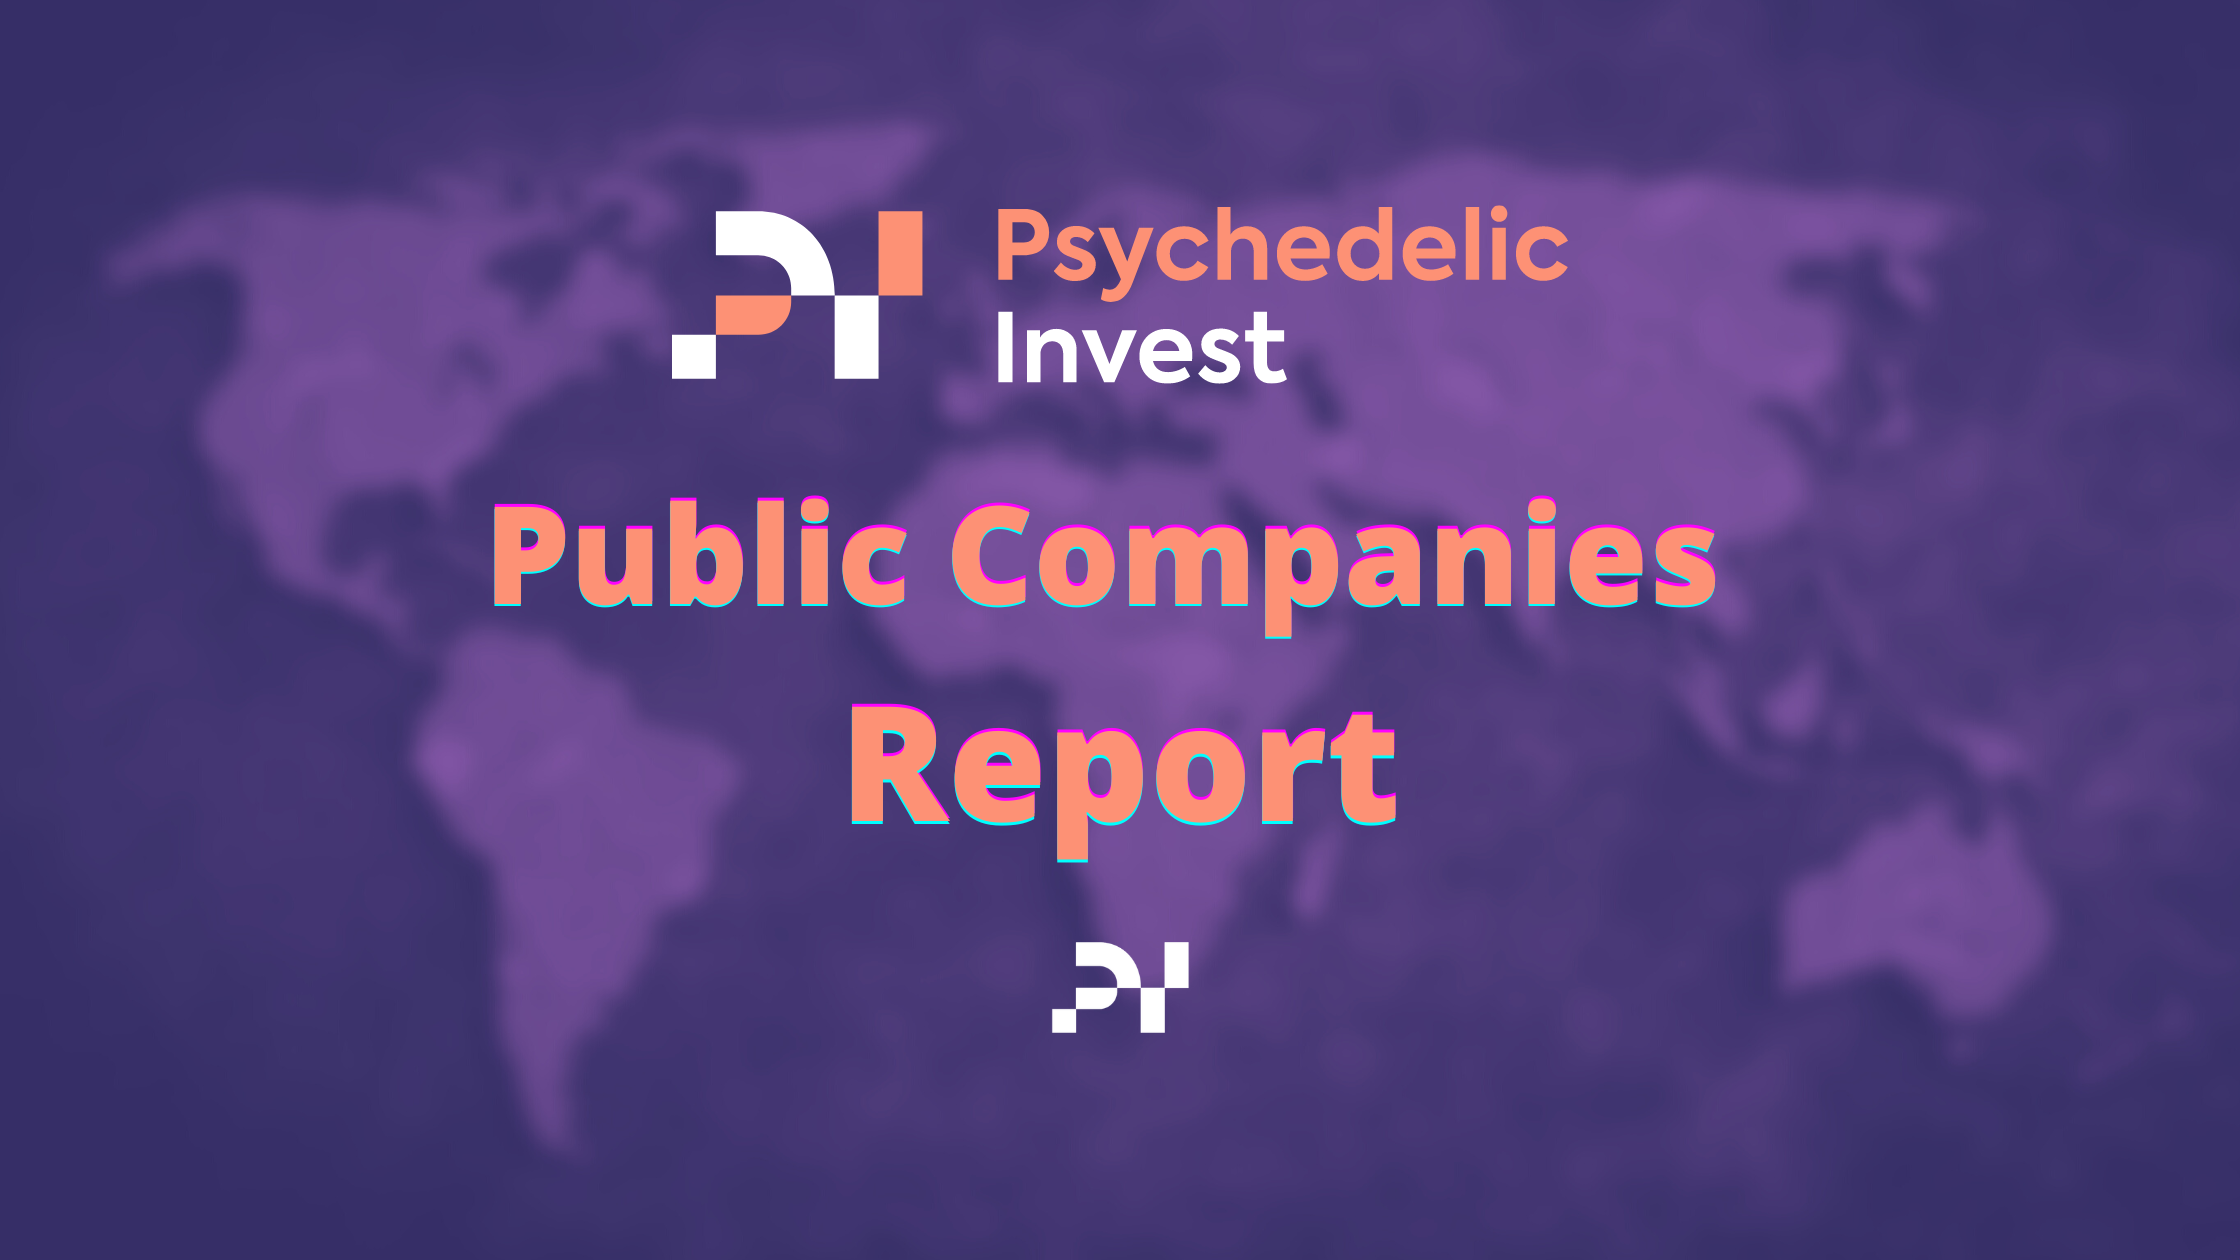 The Public Psychedelic Companies Report